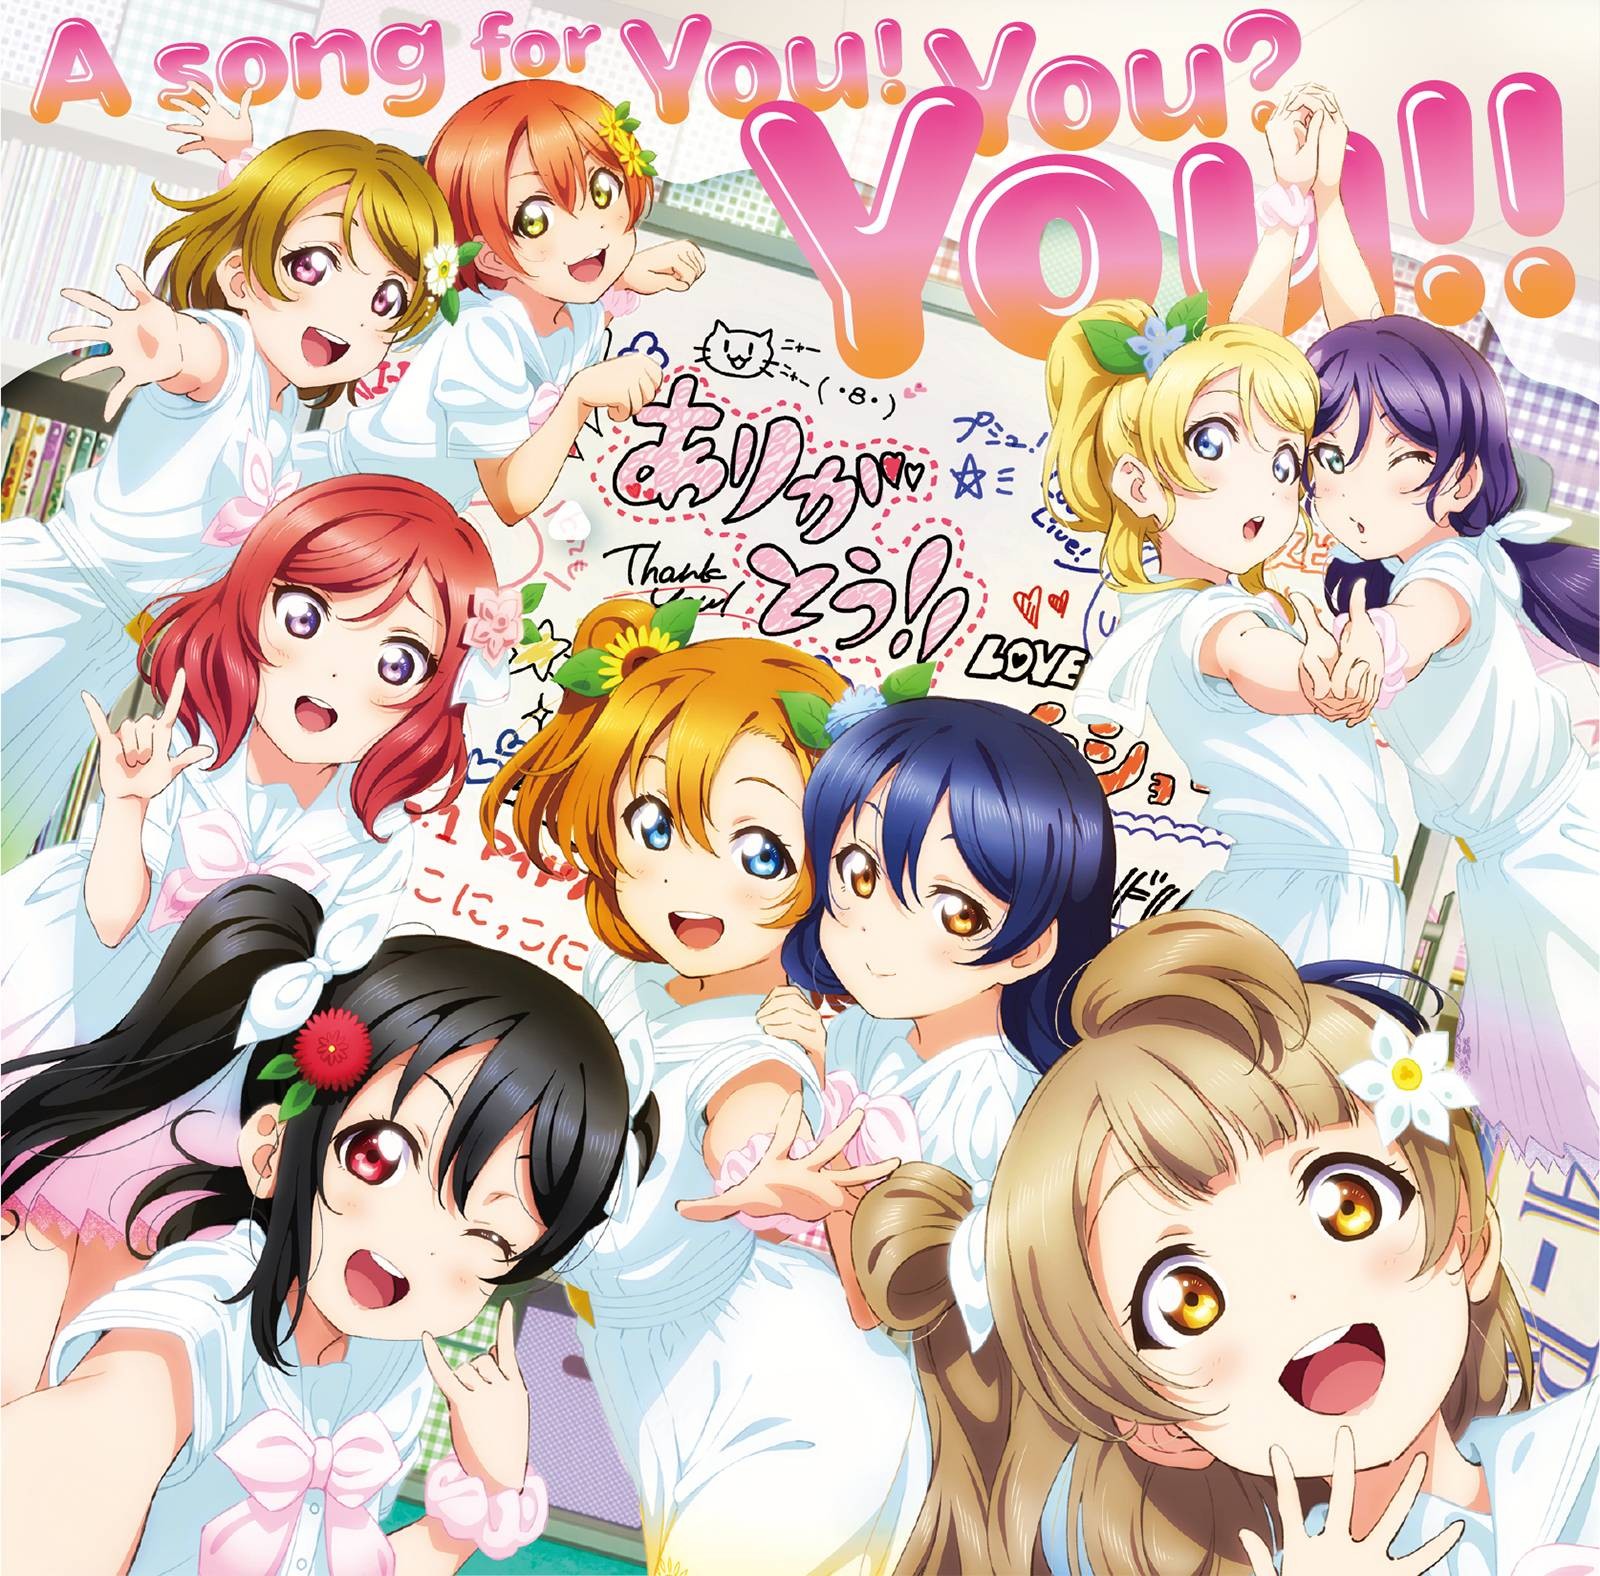 Love Live! School idol project / μ’s – A song for You! You? You!! [FLAC / 24bit Lossless / WEB] [2020.03.25]